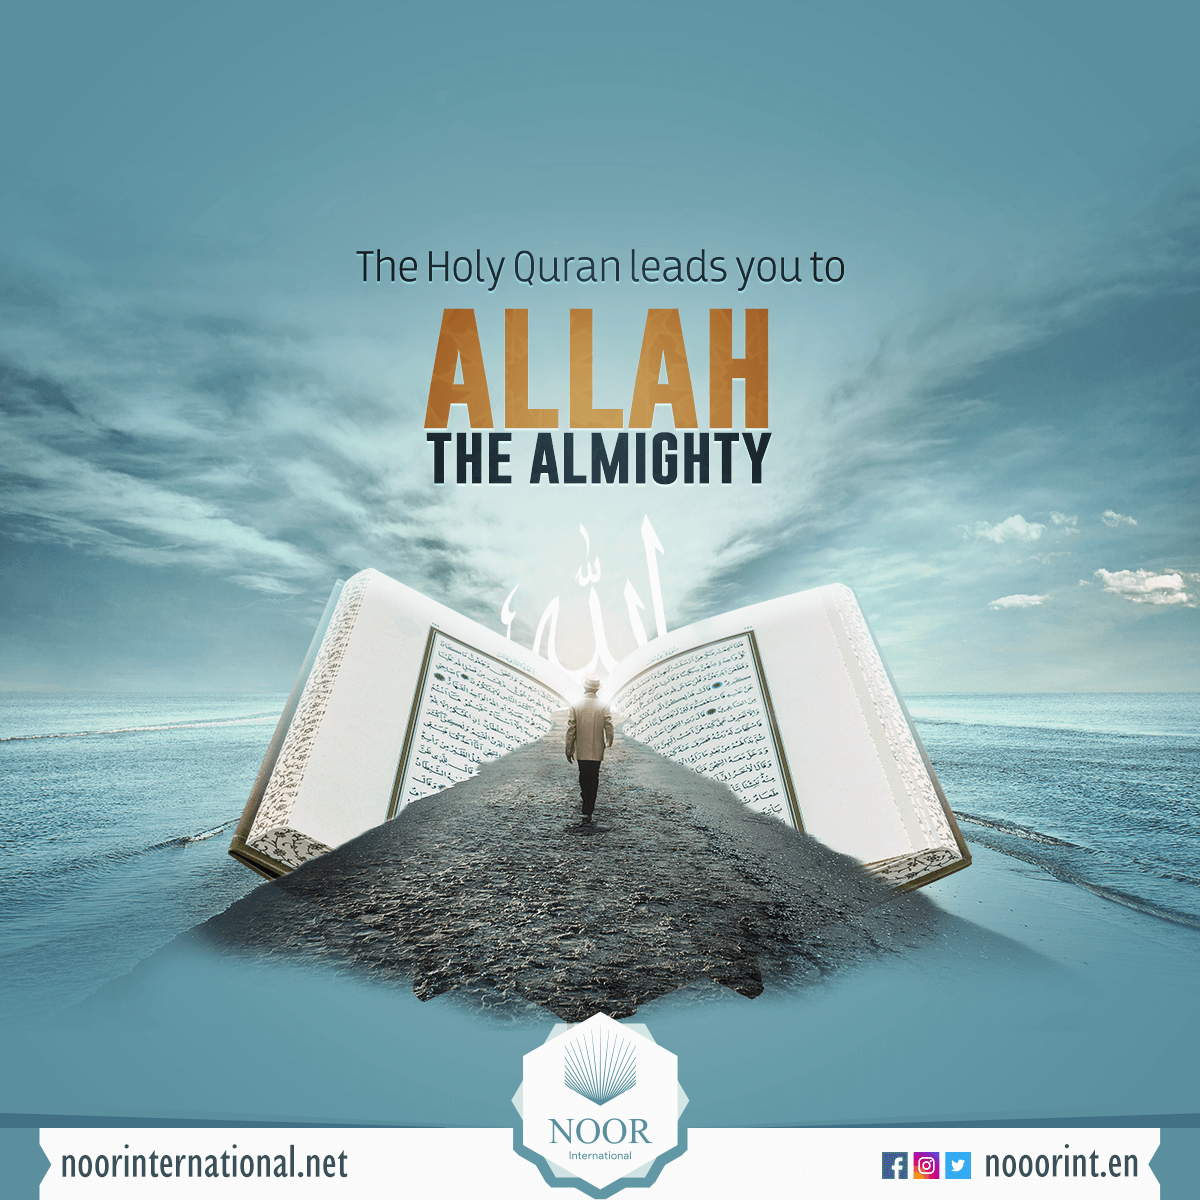 The Holy Quran leads you to Allah the almighty